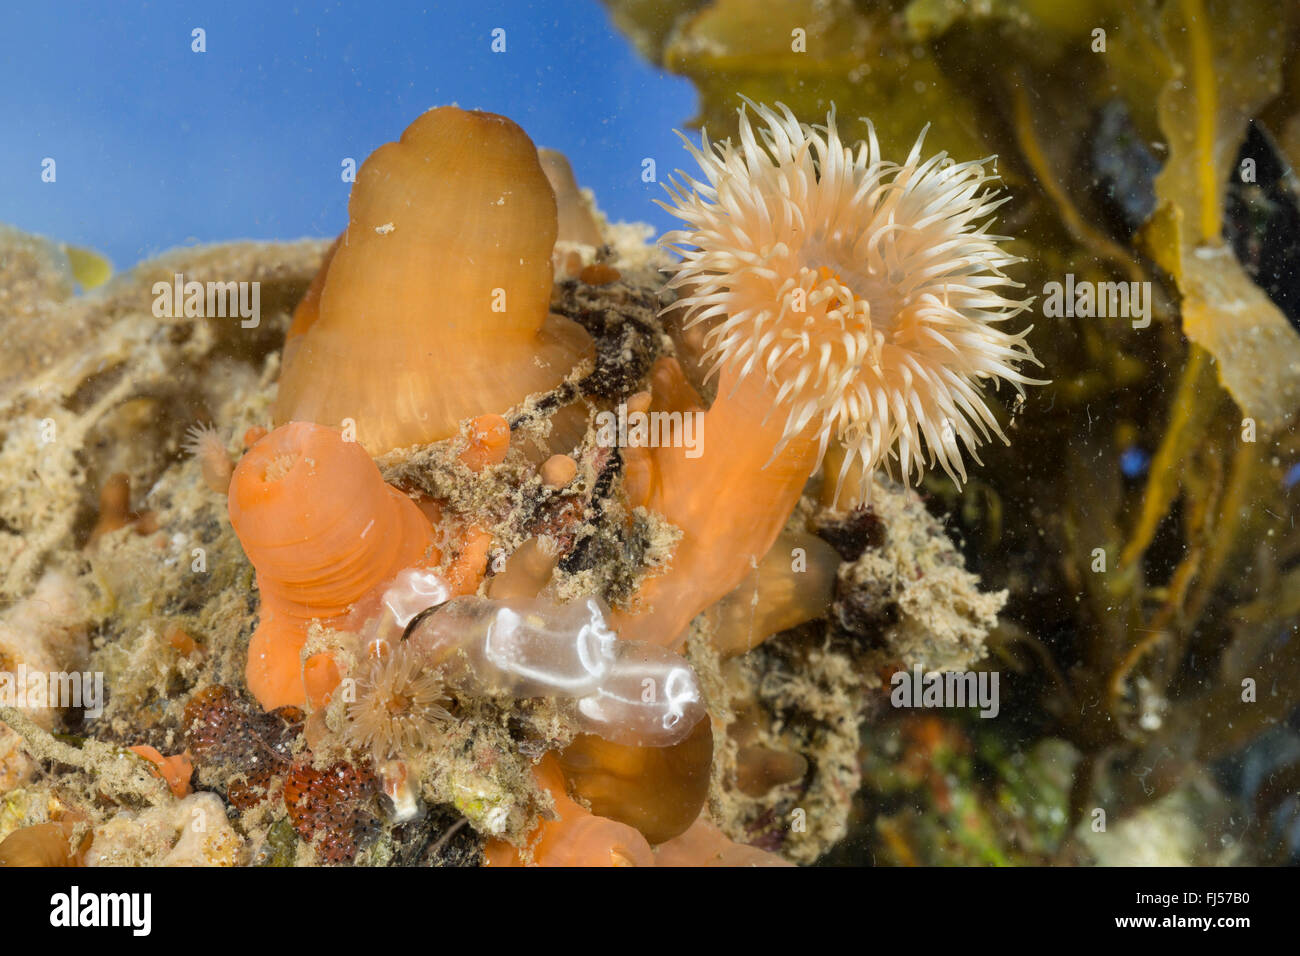 Colonal plumose anemone, Frilled anemone, Plumose sea anemone, Brown sea anemone, Plumose anemone (Metridium senile), with sea squirts Stock Photo